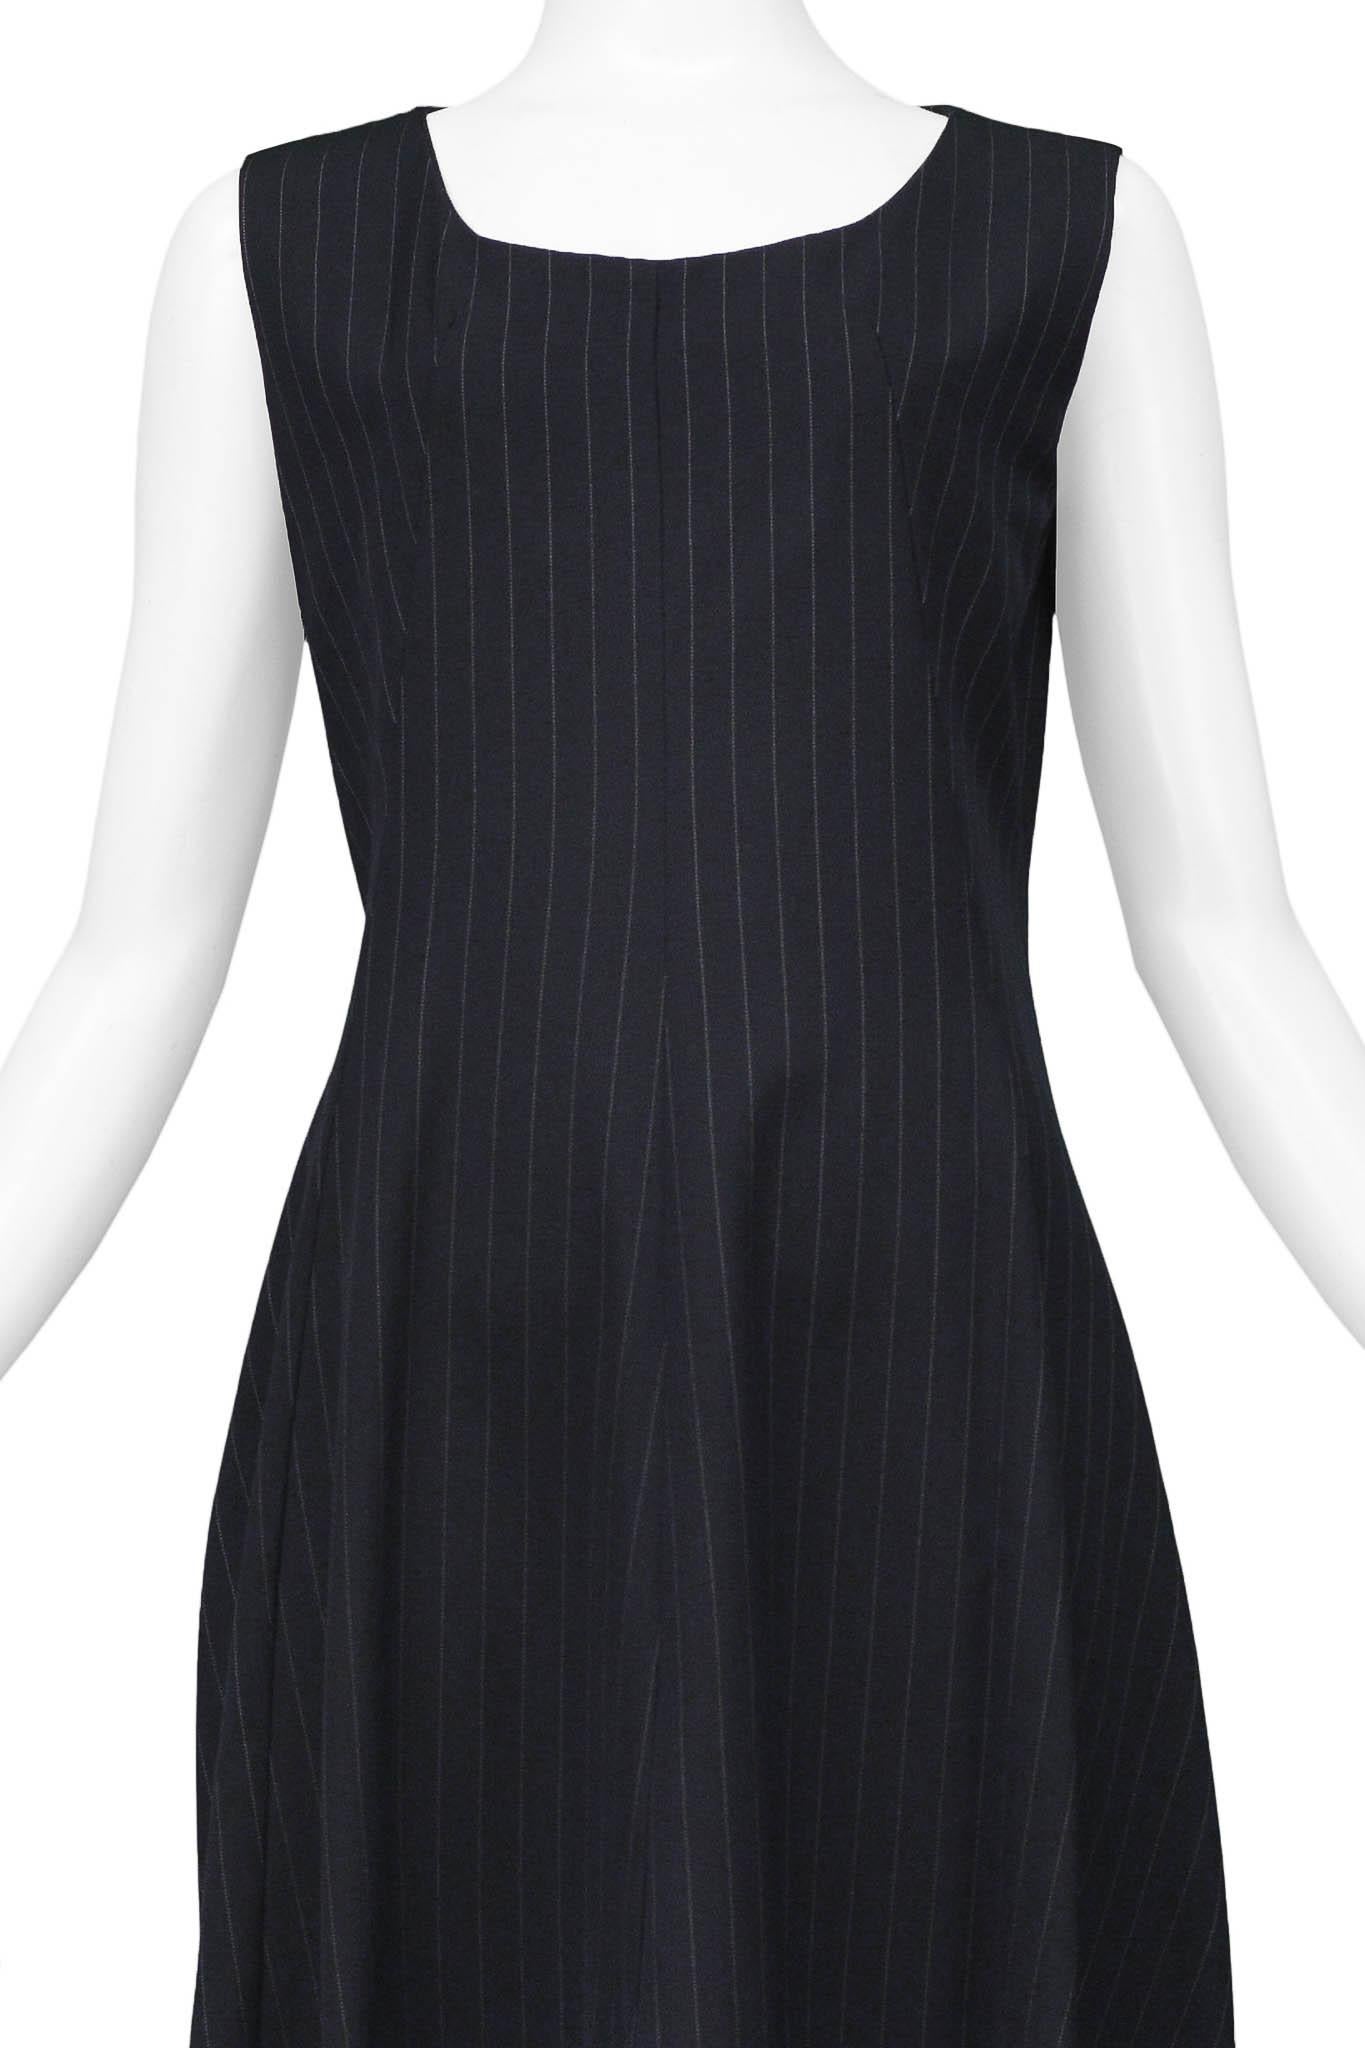 Comme Des Garcons Black Pinstripe Pocket Dress 1992 In Excellent Condition For Sale In Los Angeles, CA